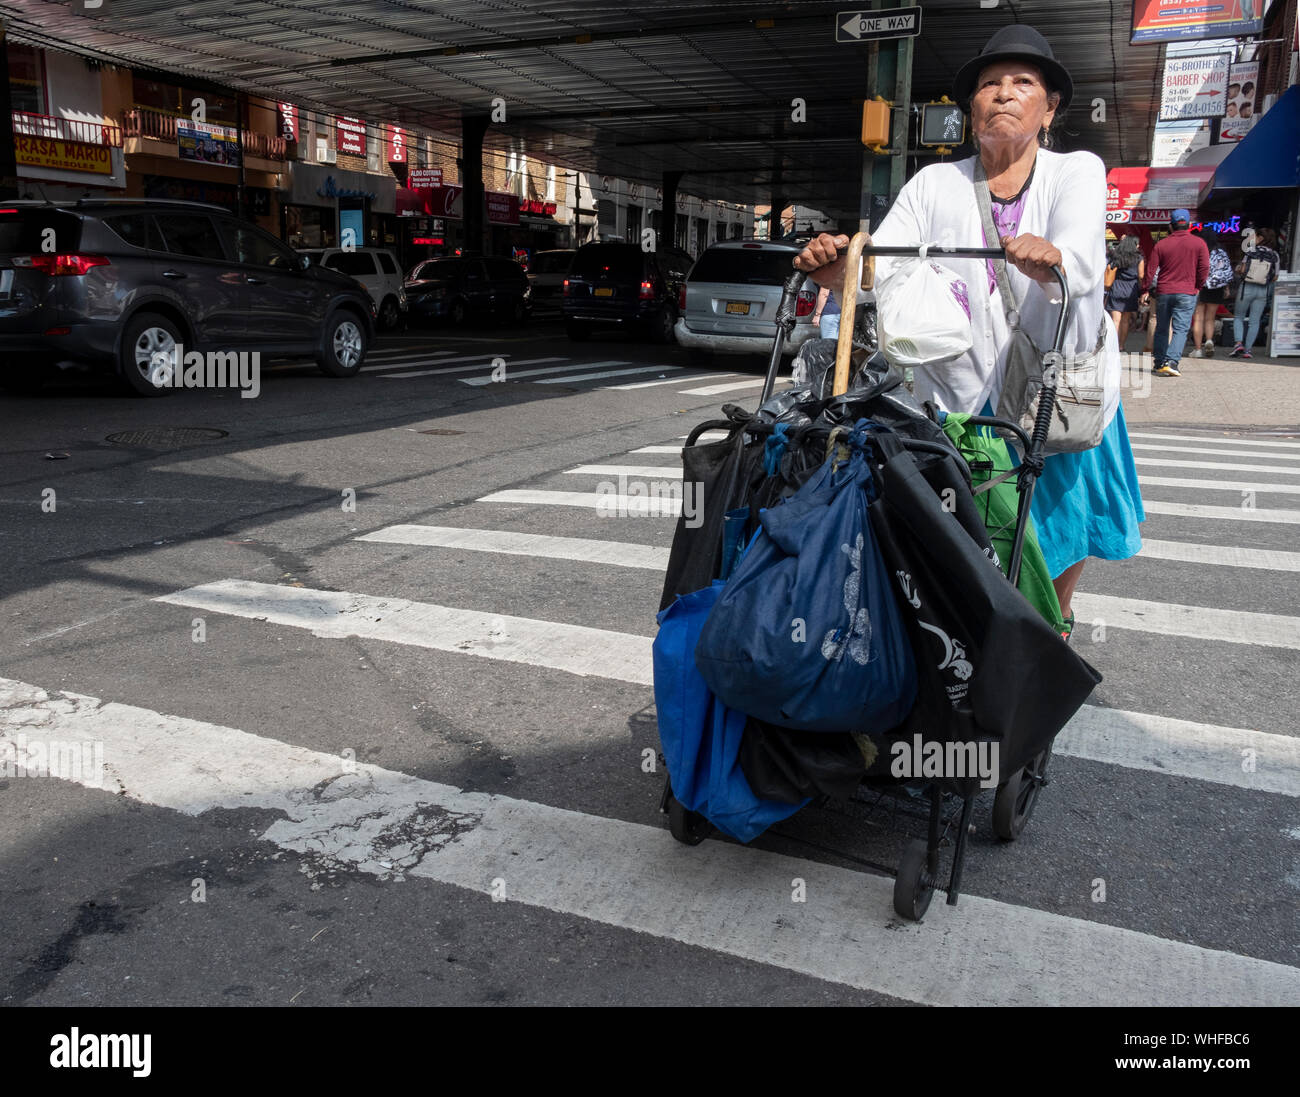 A woman in a hat, probaly Mexican, crosses the street pushing a cart. On Roosevelt avenue in Jackson Heights, Queens, New York City. Stock Photo